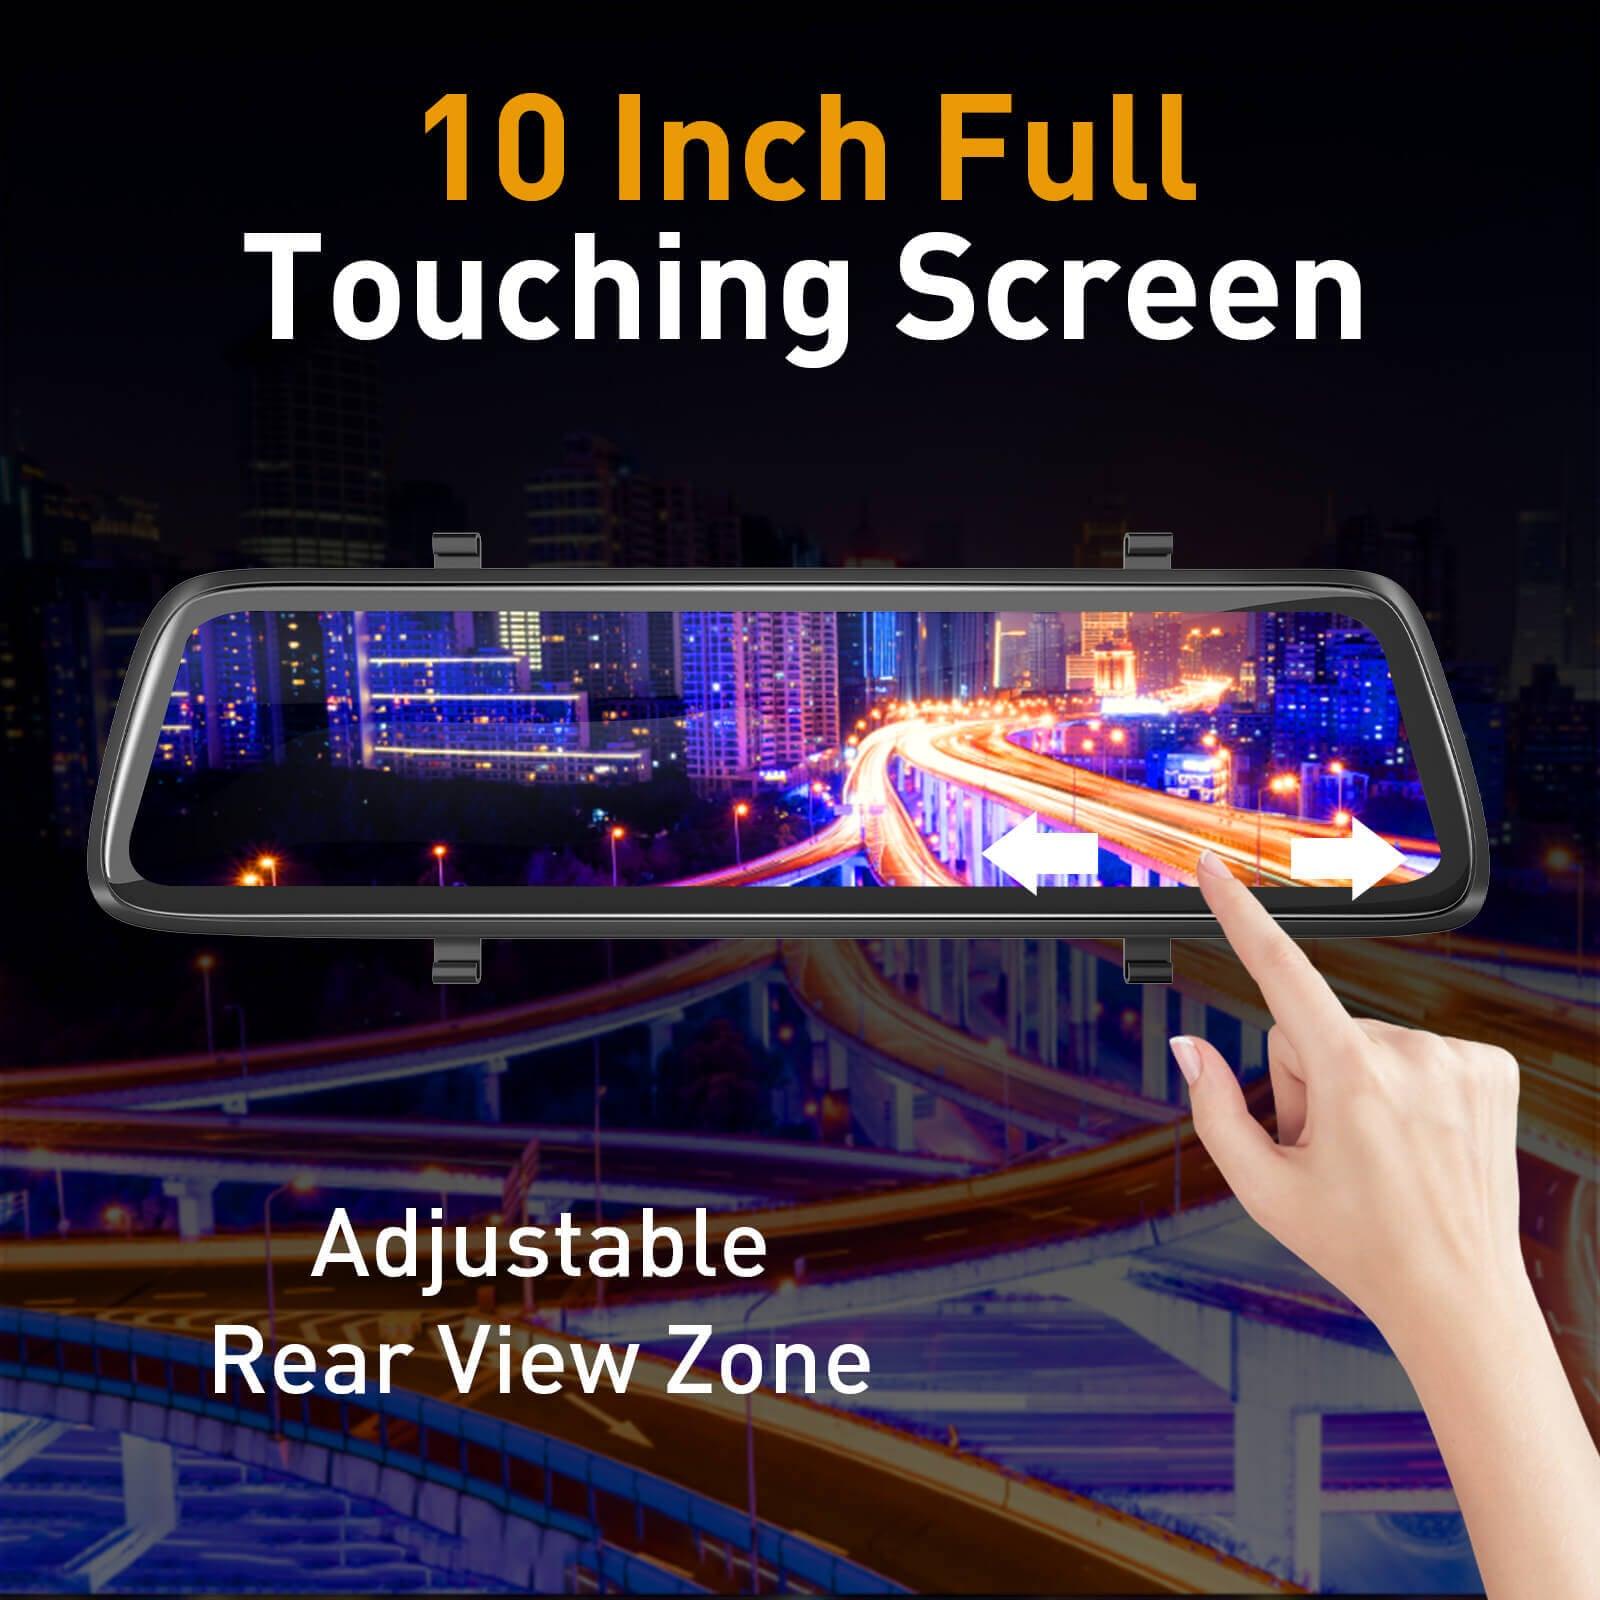 Cost-effective and Most worthwhile Mirror Dash Cam Dual 1080p Lens FHD 10 Inch Touchscreen With 24h Car Parking Monitor, Star Vision, 32GB - XGODY 